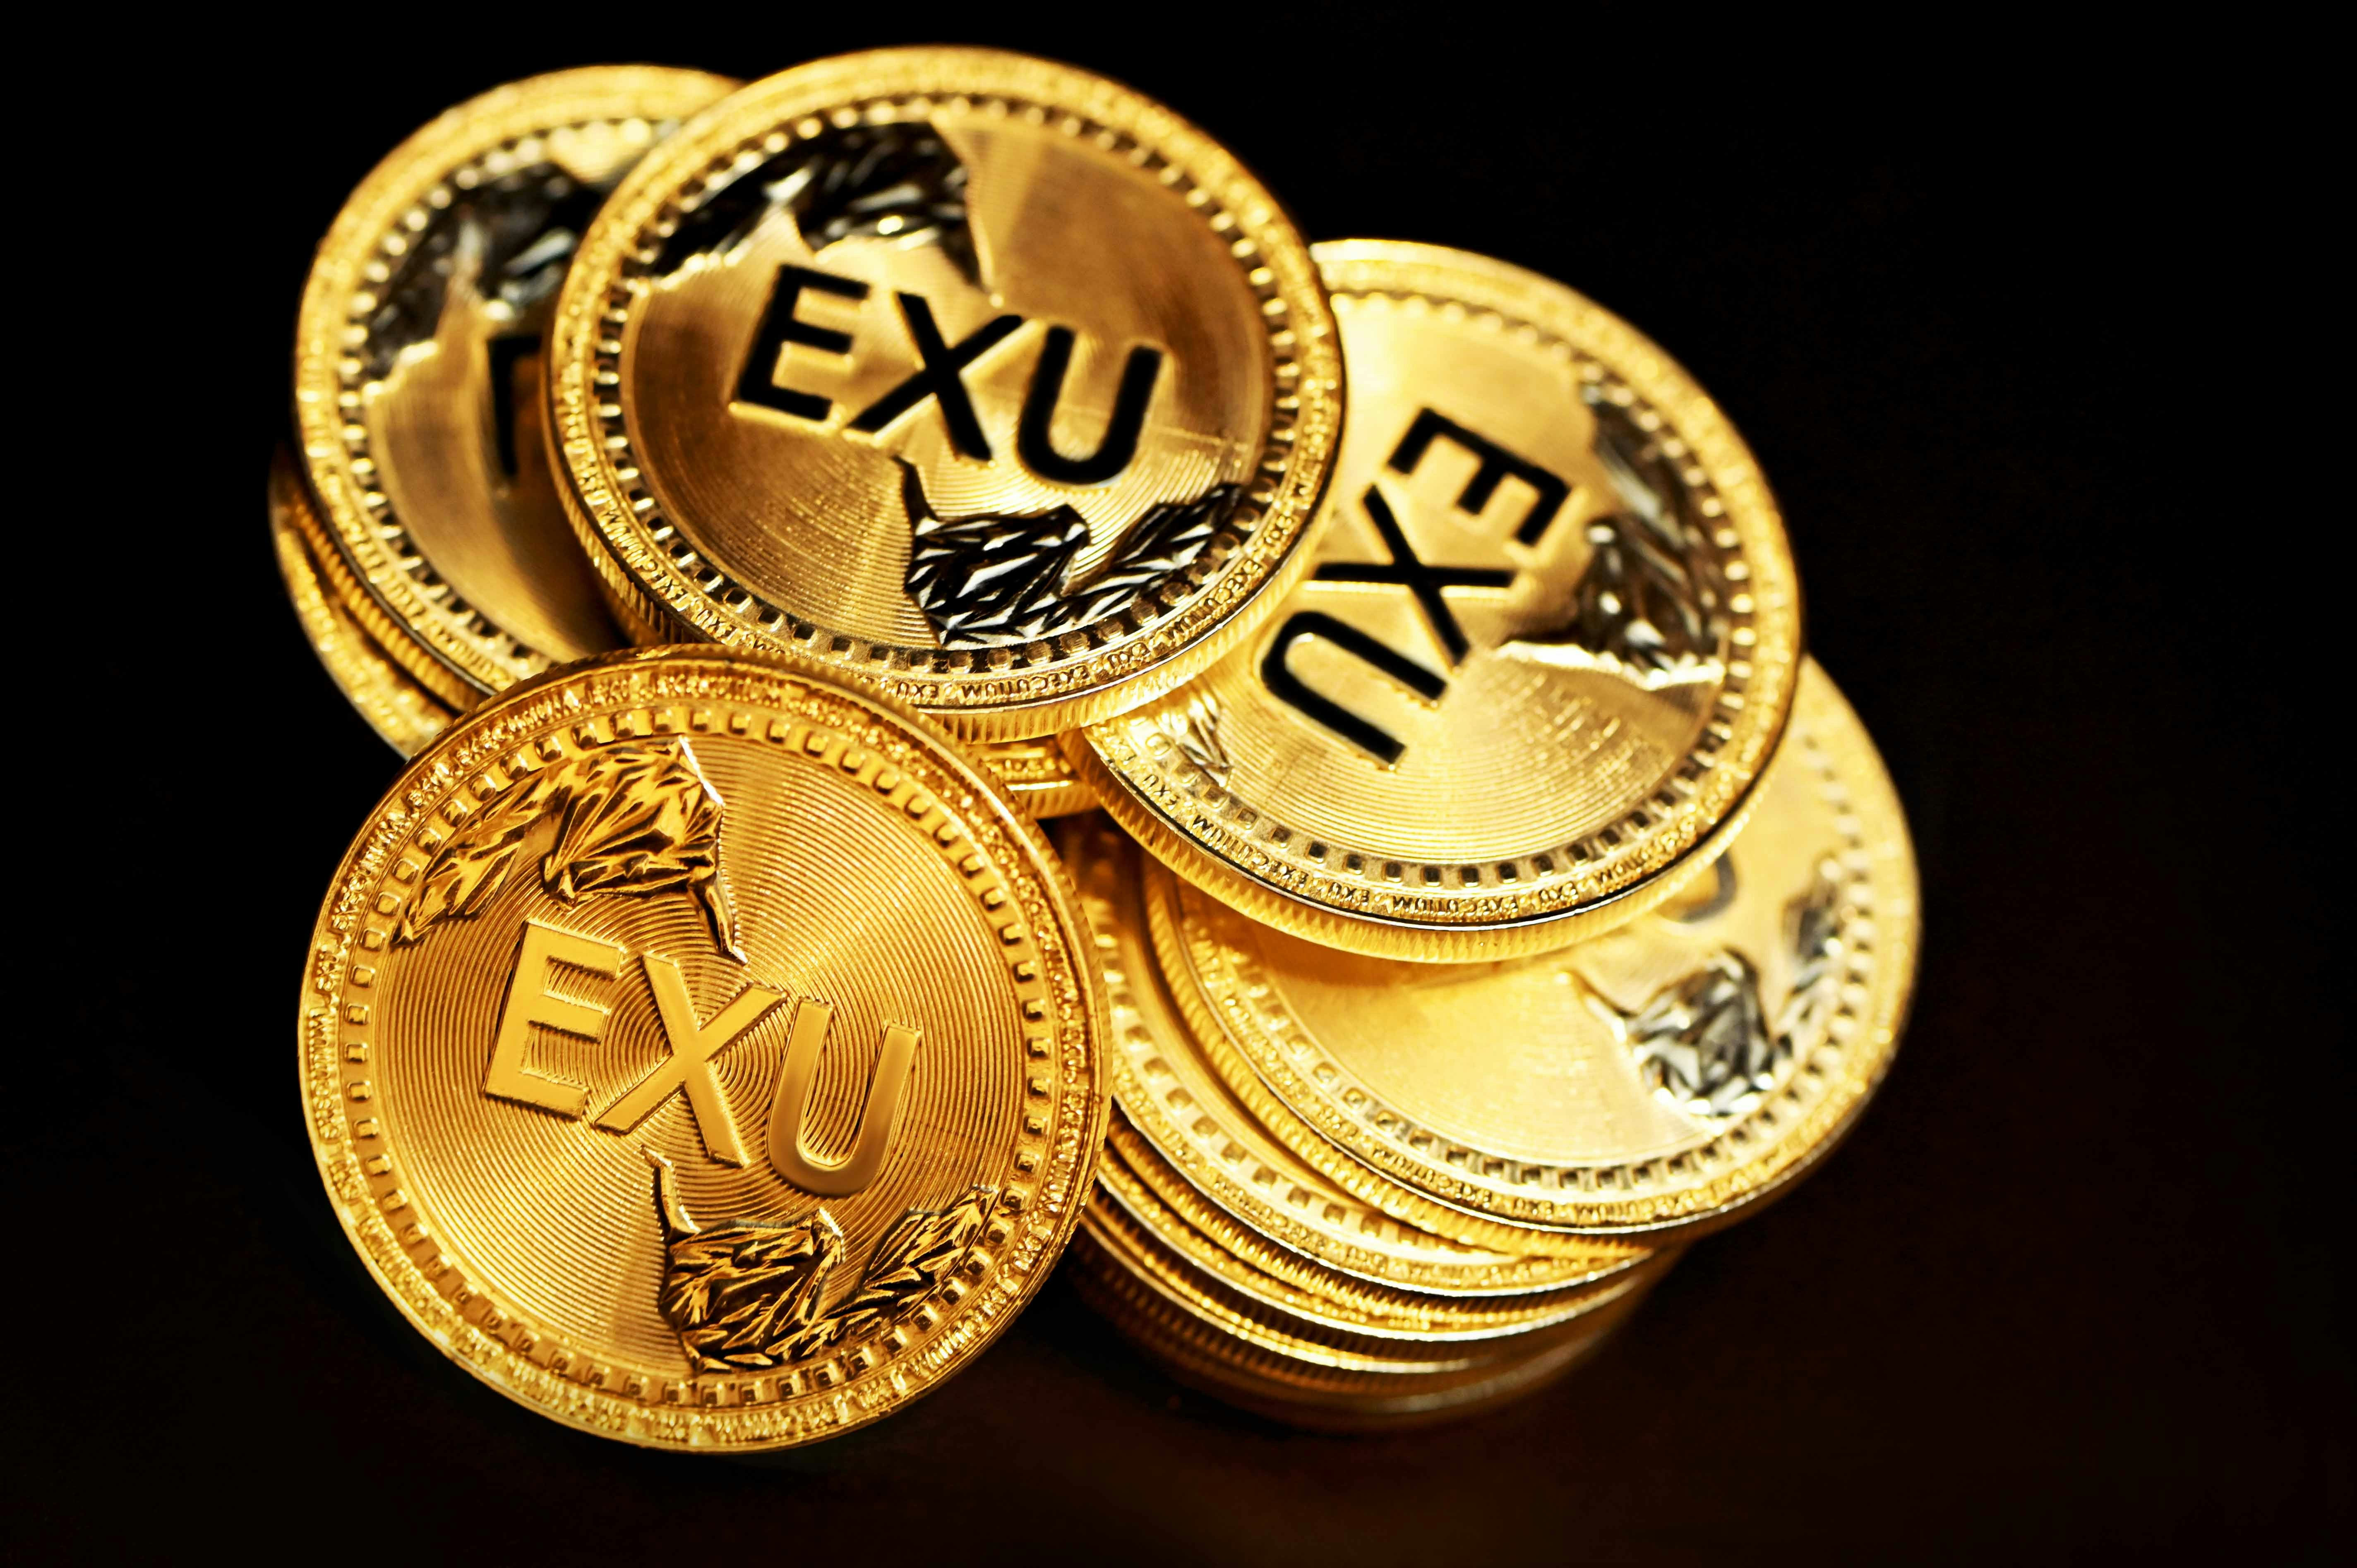 Executium coins in a messy pile